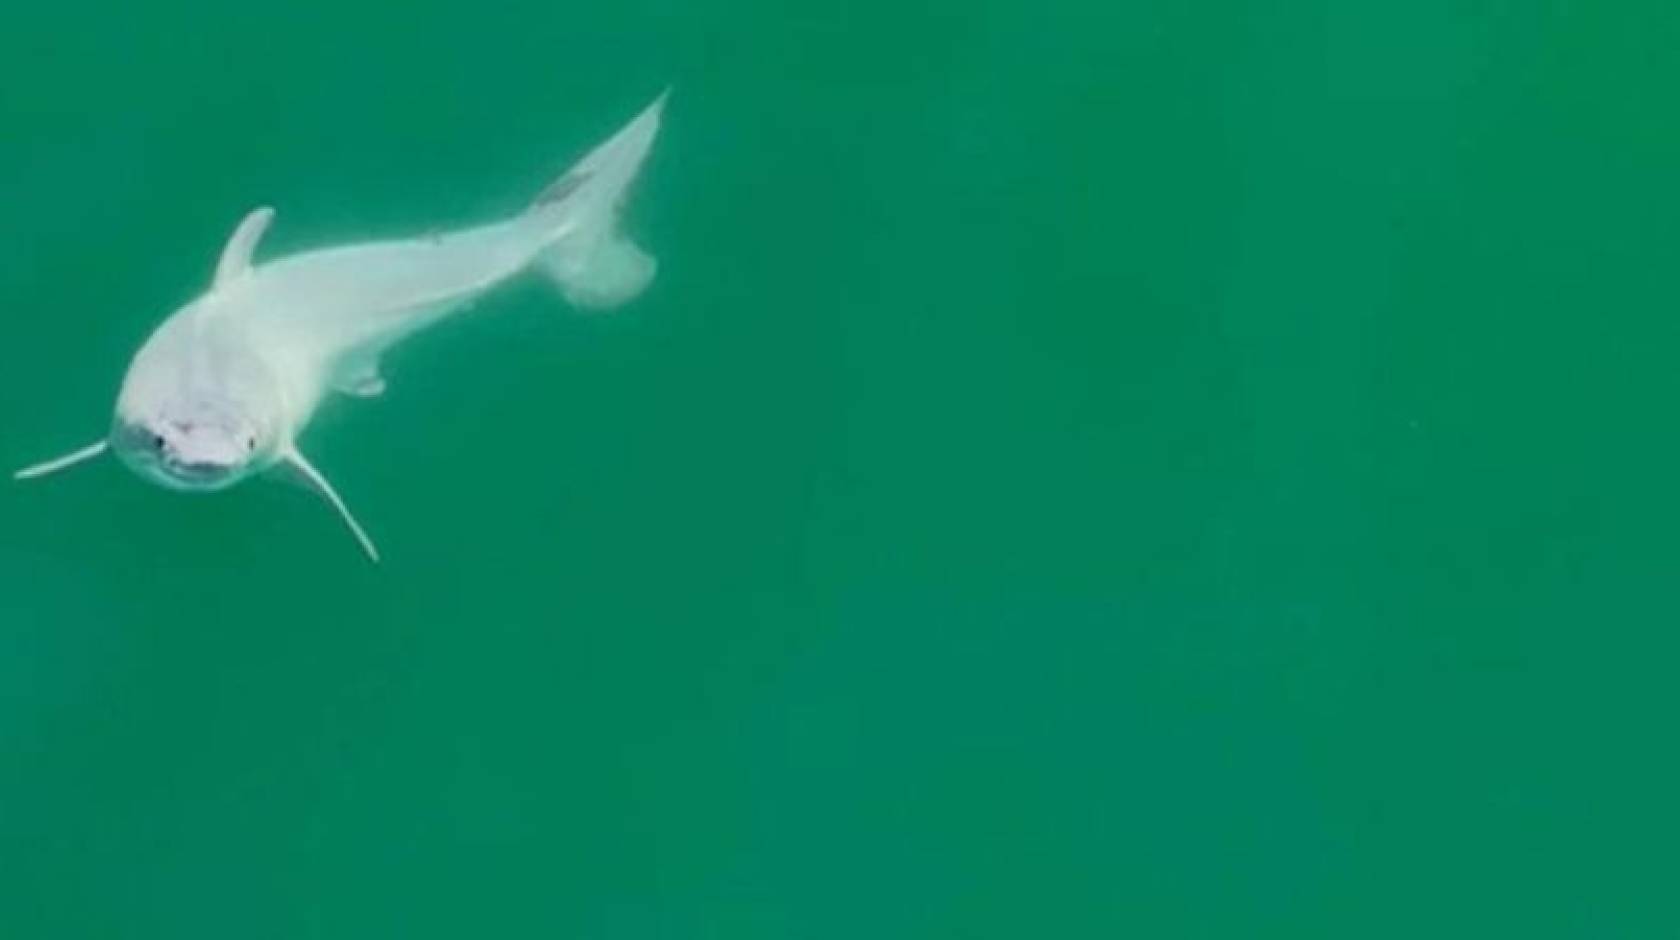 First-ever sighting of a live newborn great white